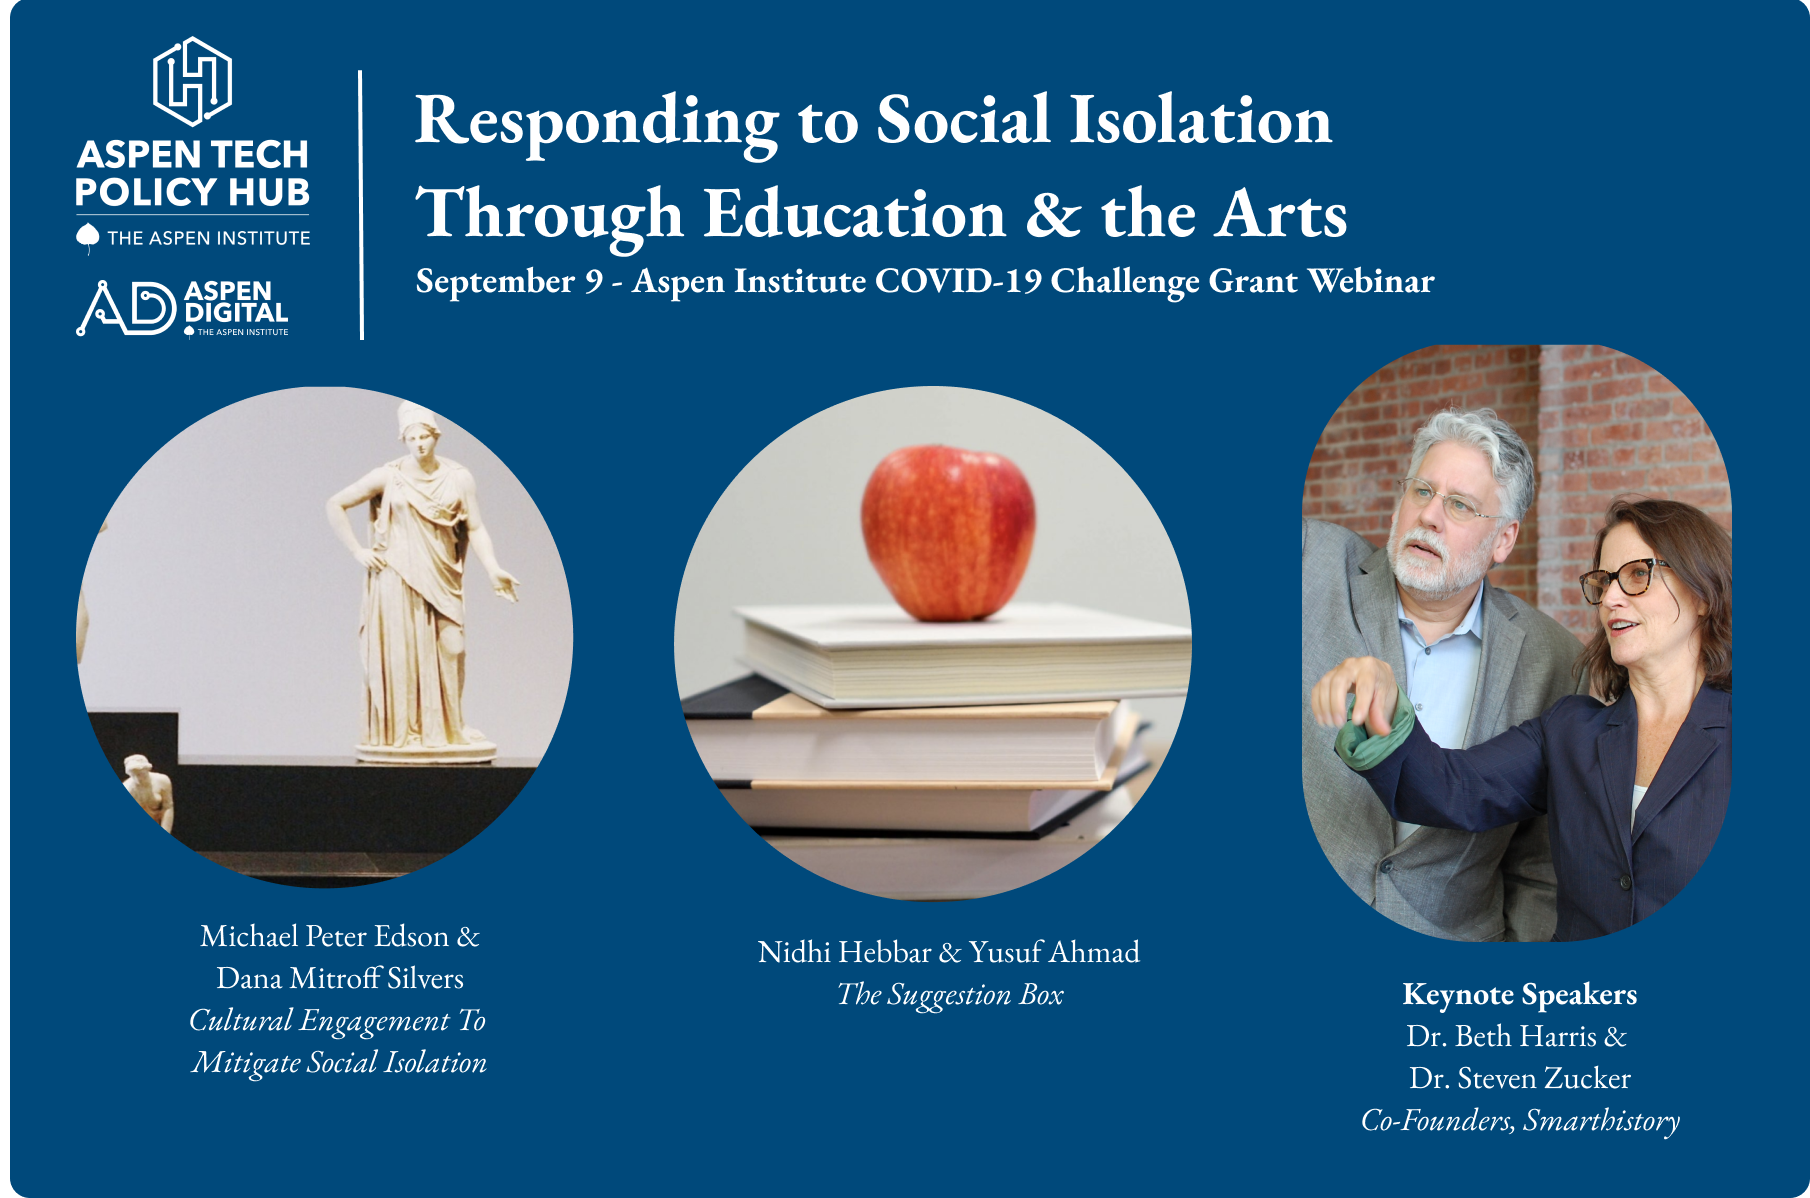 Responding to Social Isolation Through Education and the Arts